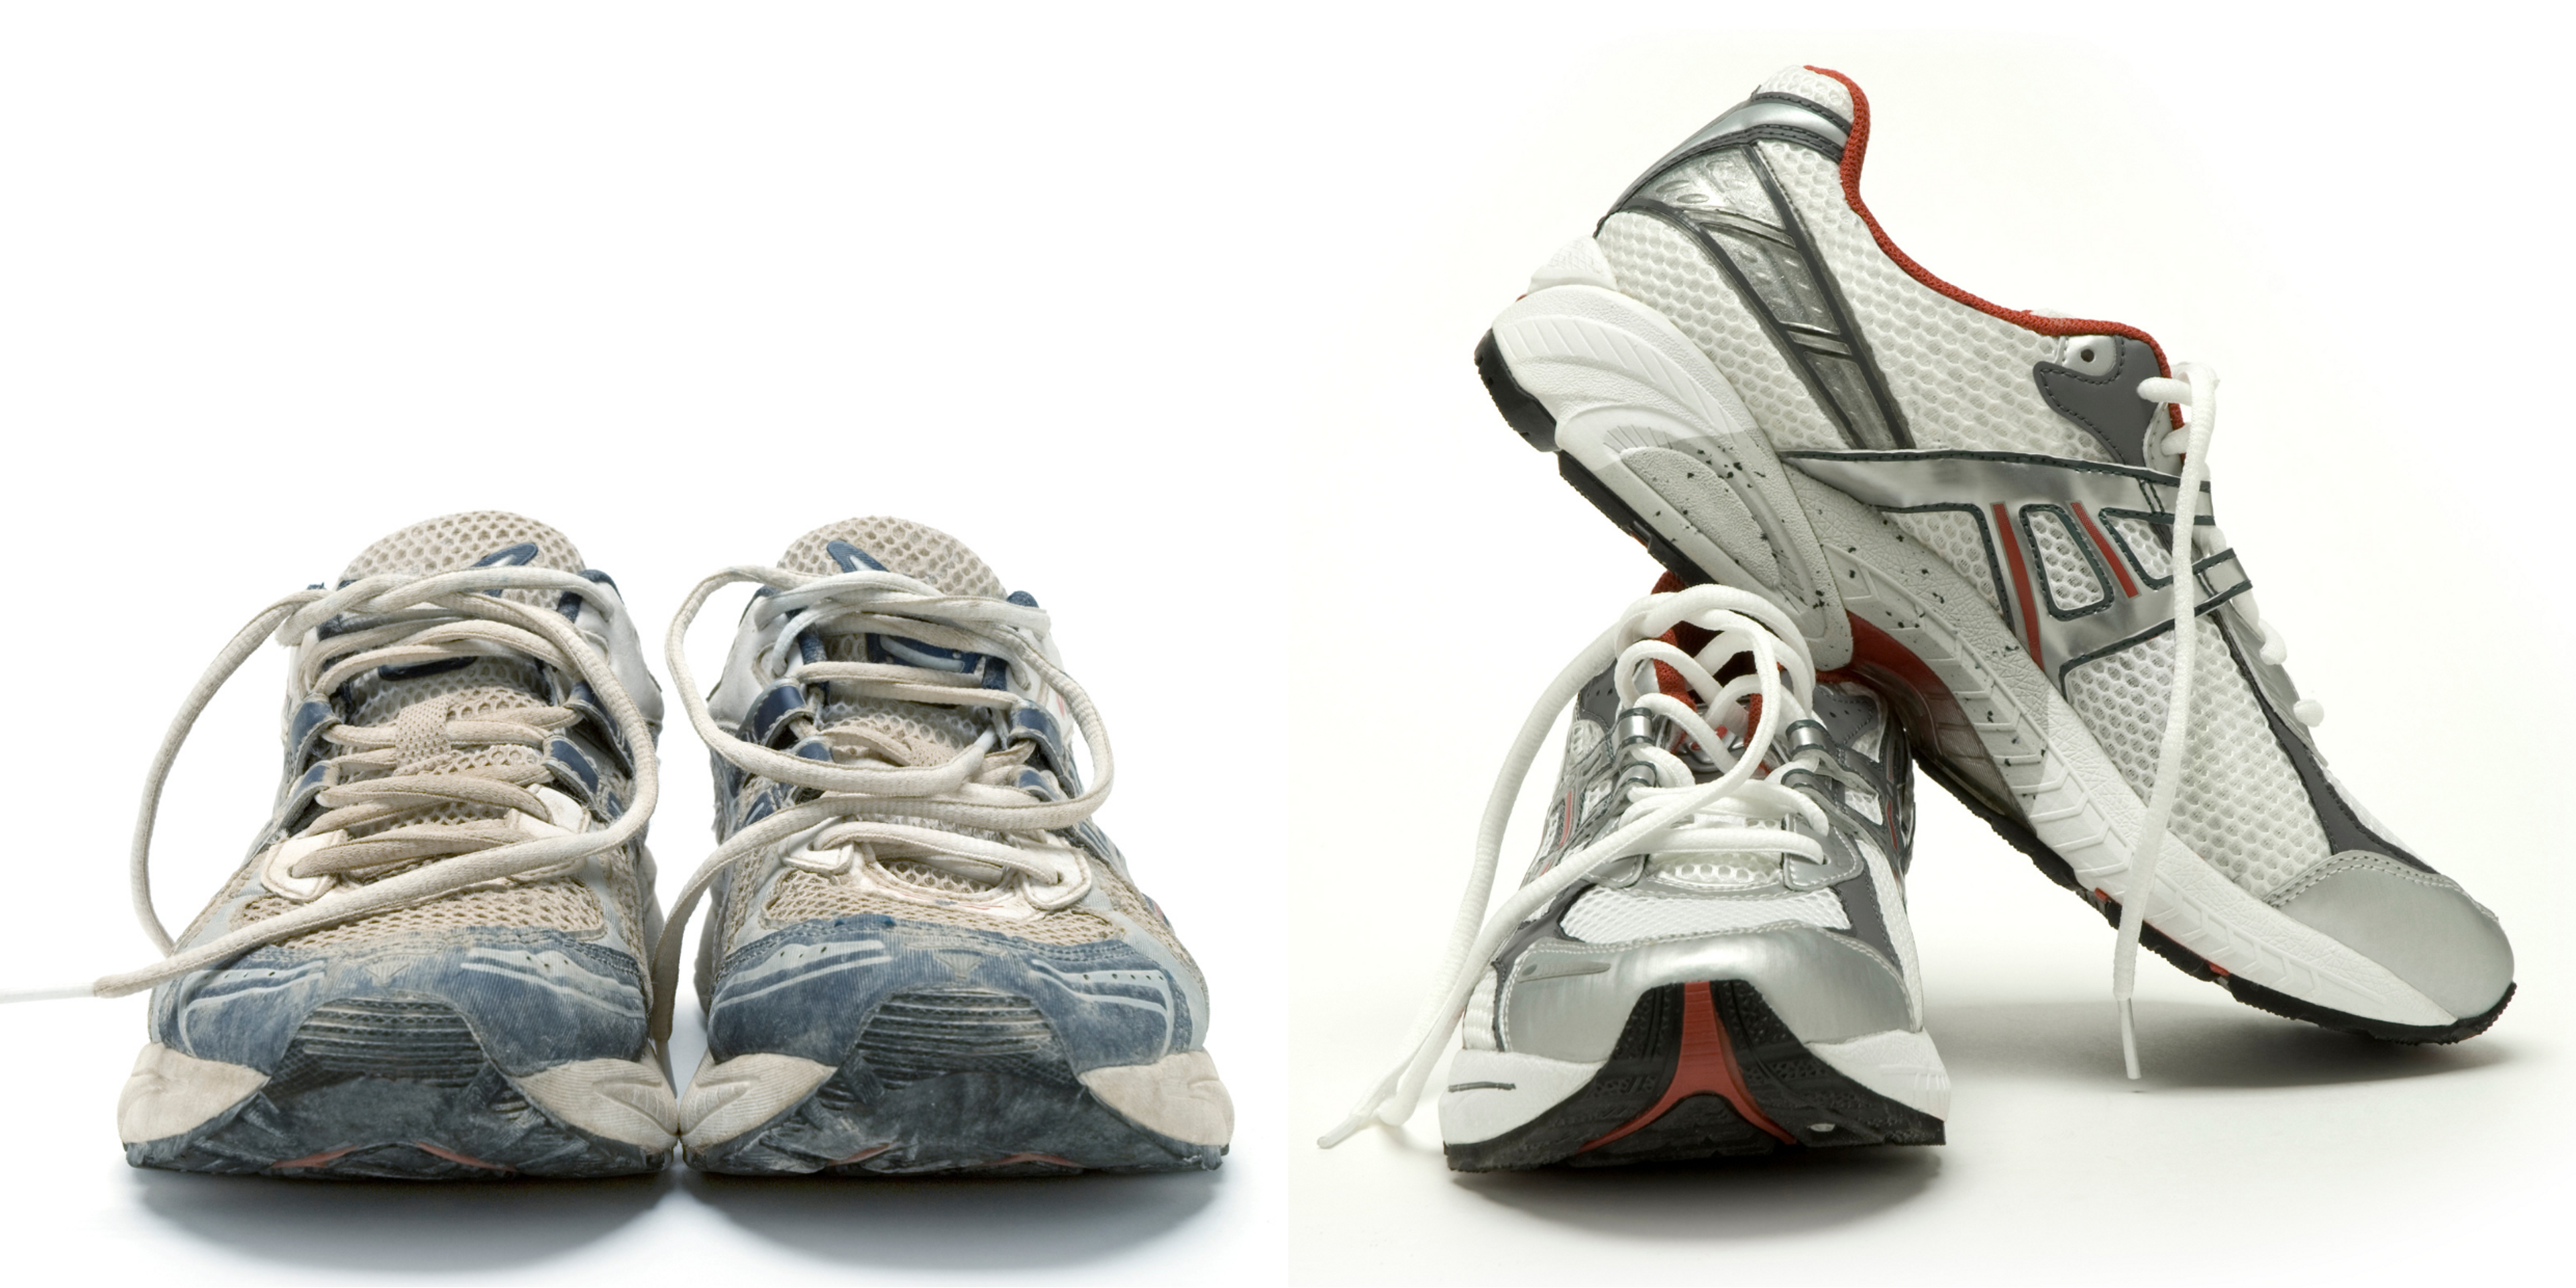 Replace your old shoes for ankle sprain prevention